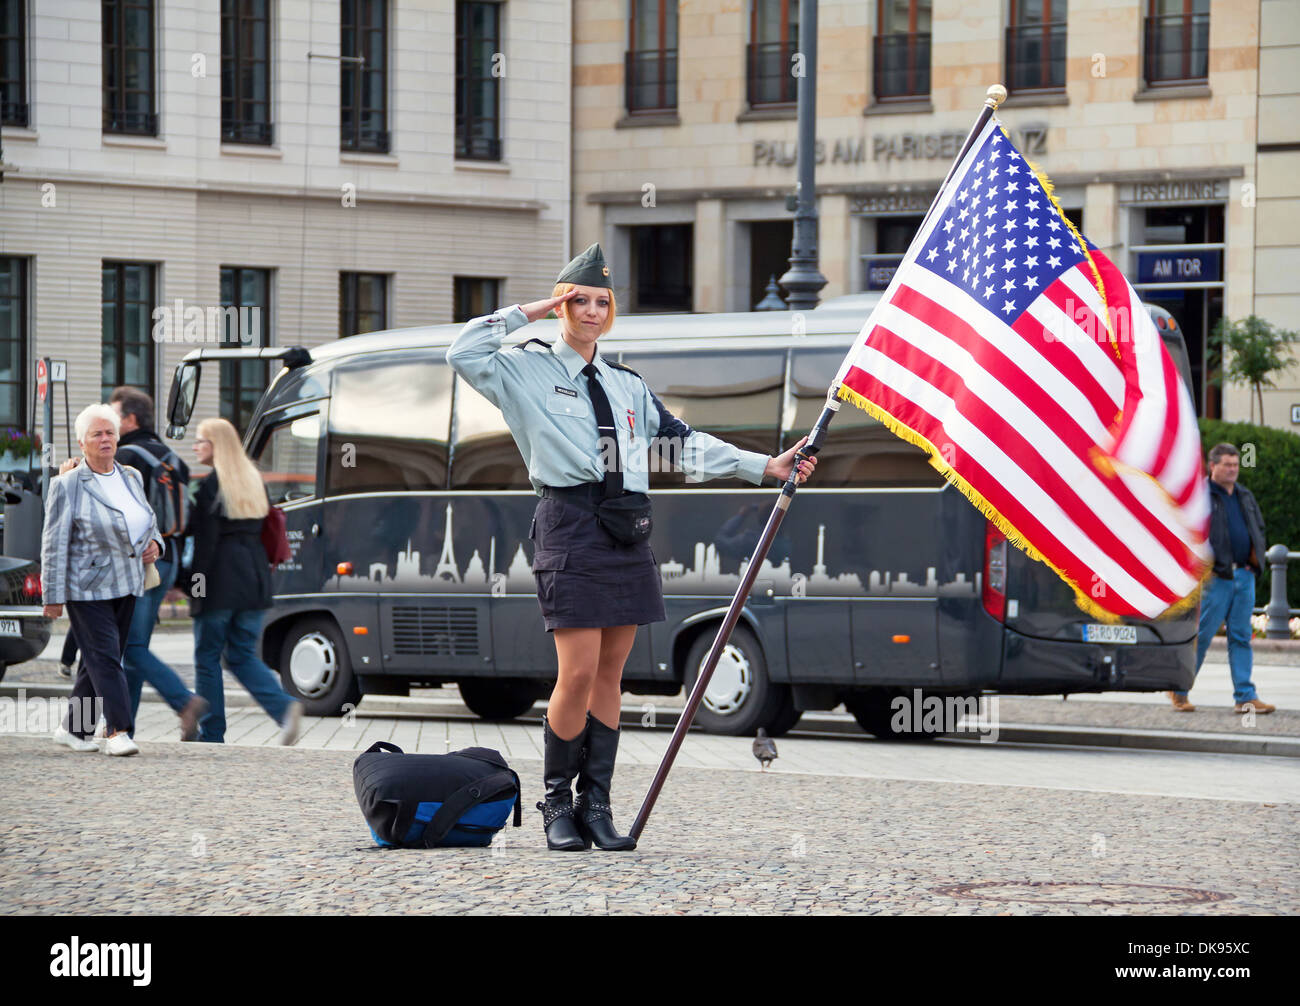 BERLIN, GERMANY - MAY 18, 2009: cute young woman with an American flag on the street of Berlin on May 18, 2009. Stock Photo